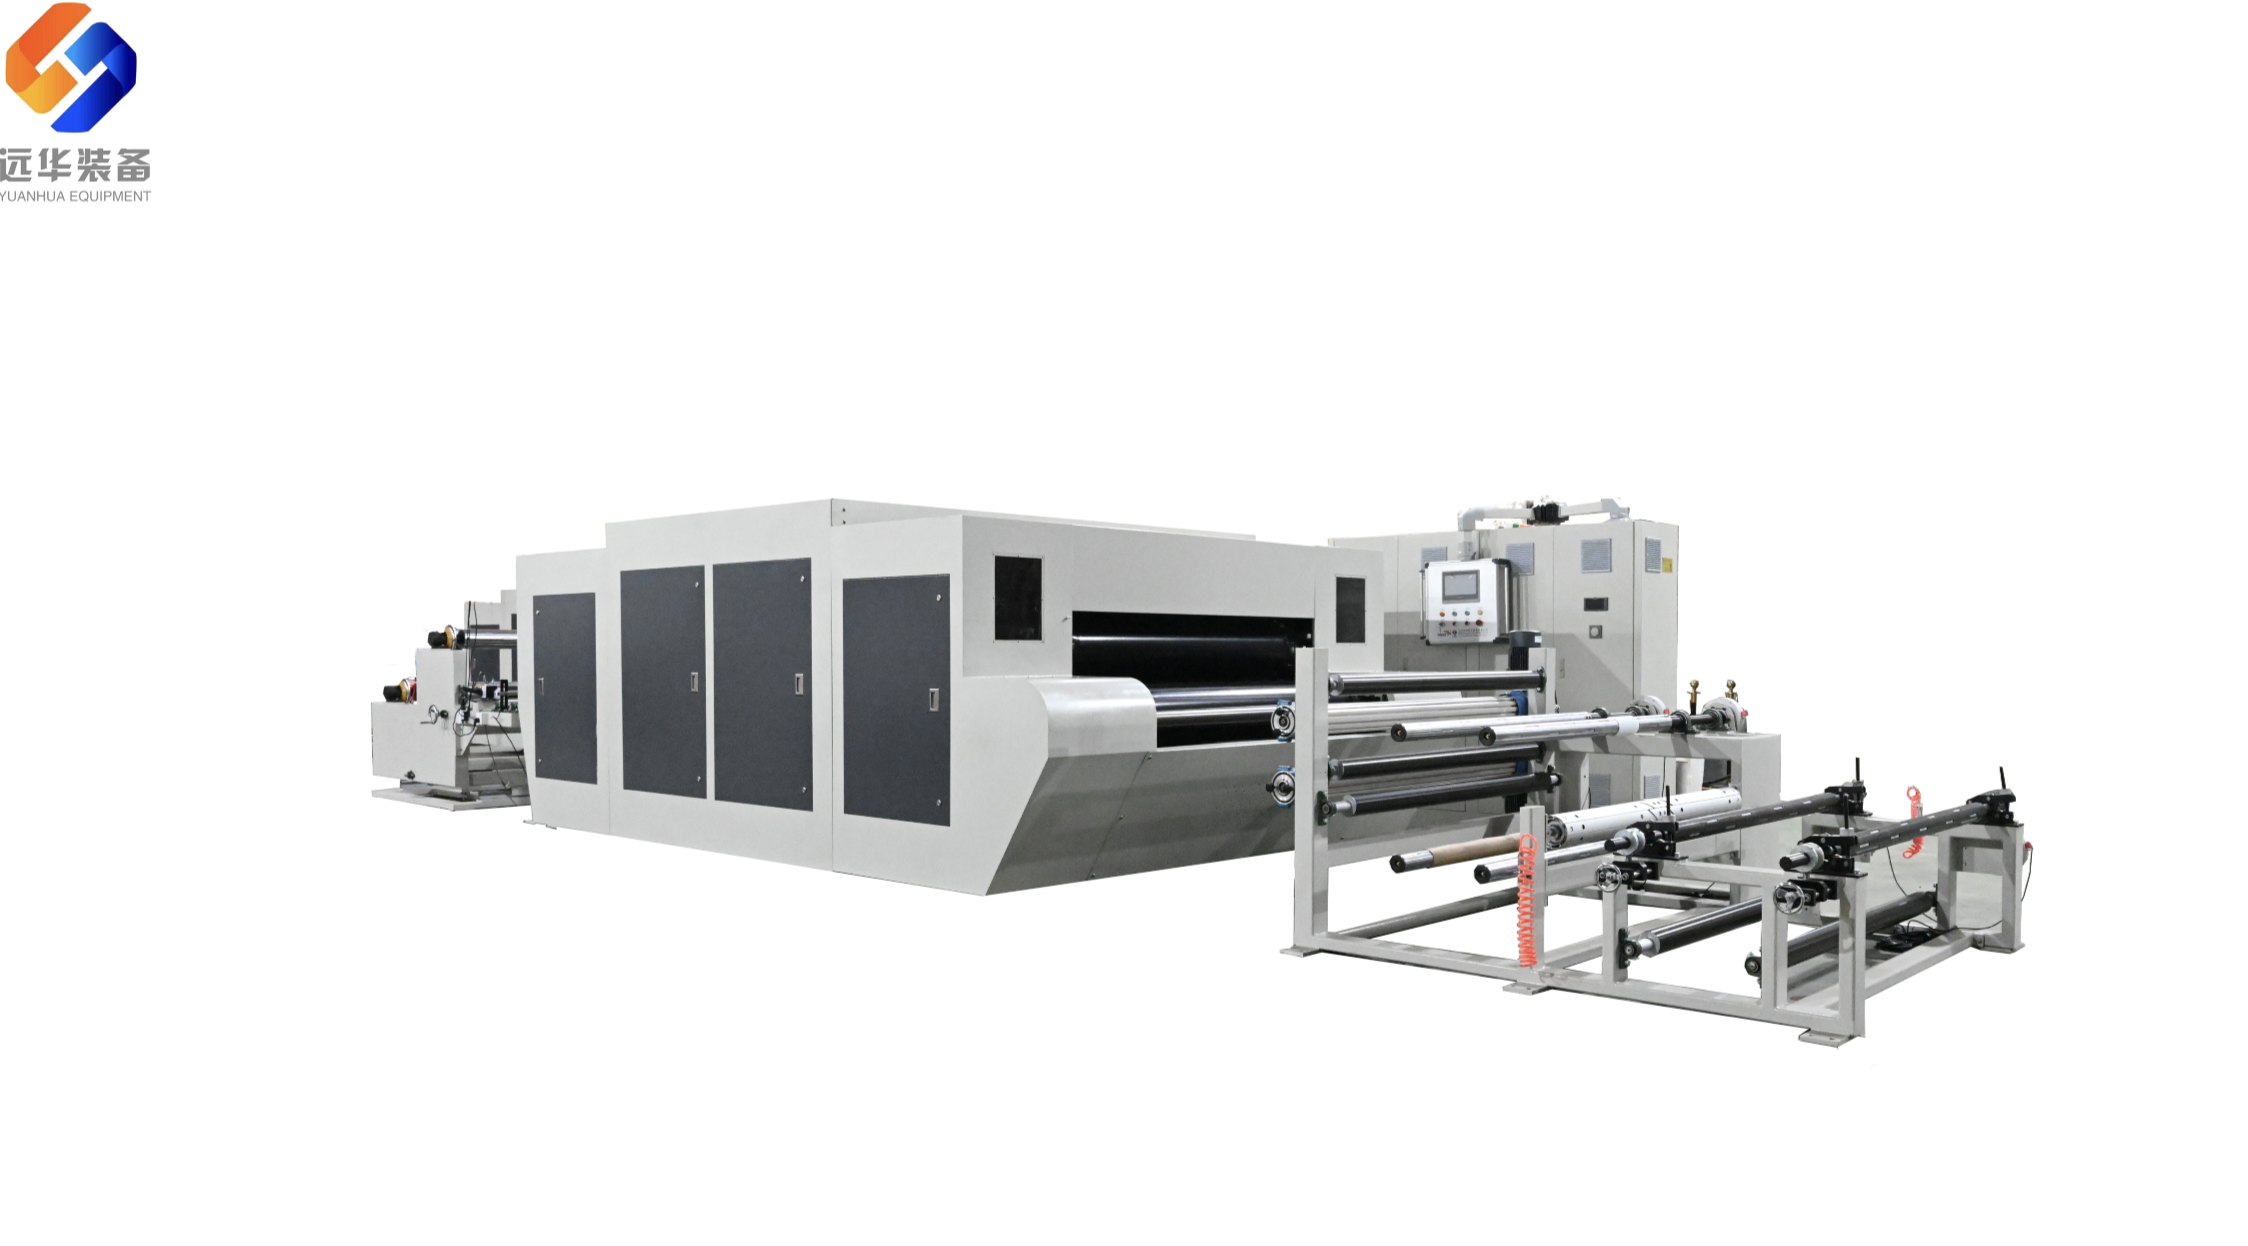 Introduction to the Double Belt Flat Bed Laminating Machine